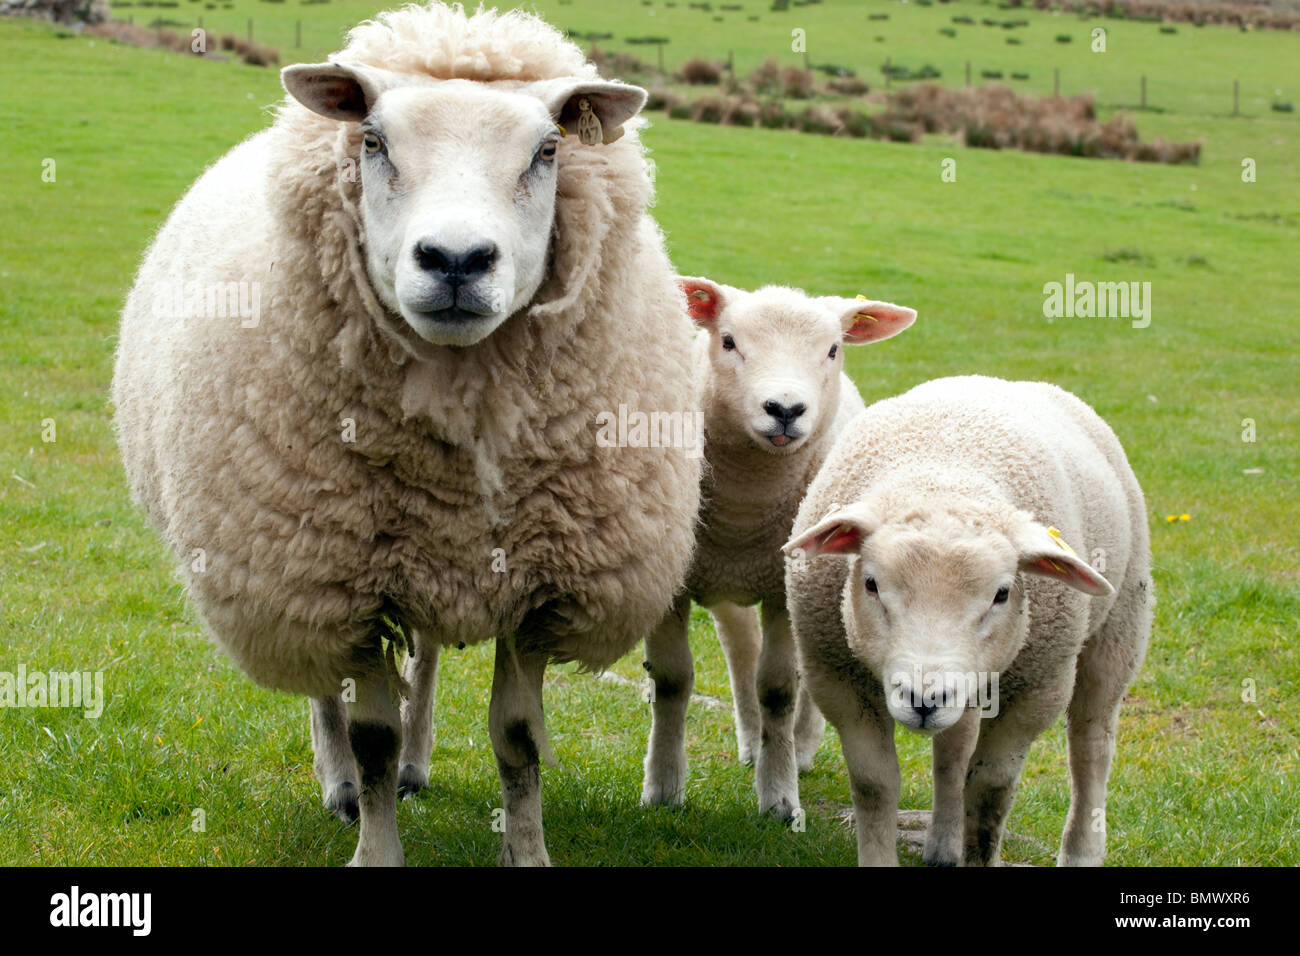 Agriculture livestock sheep with two spring lambs Dumfries and Galloway Scotland UK Stock Photo